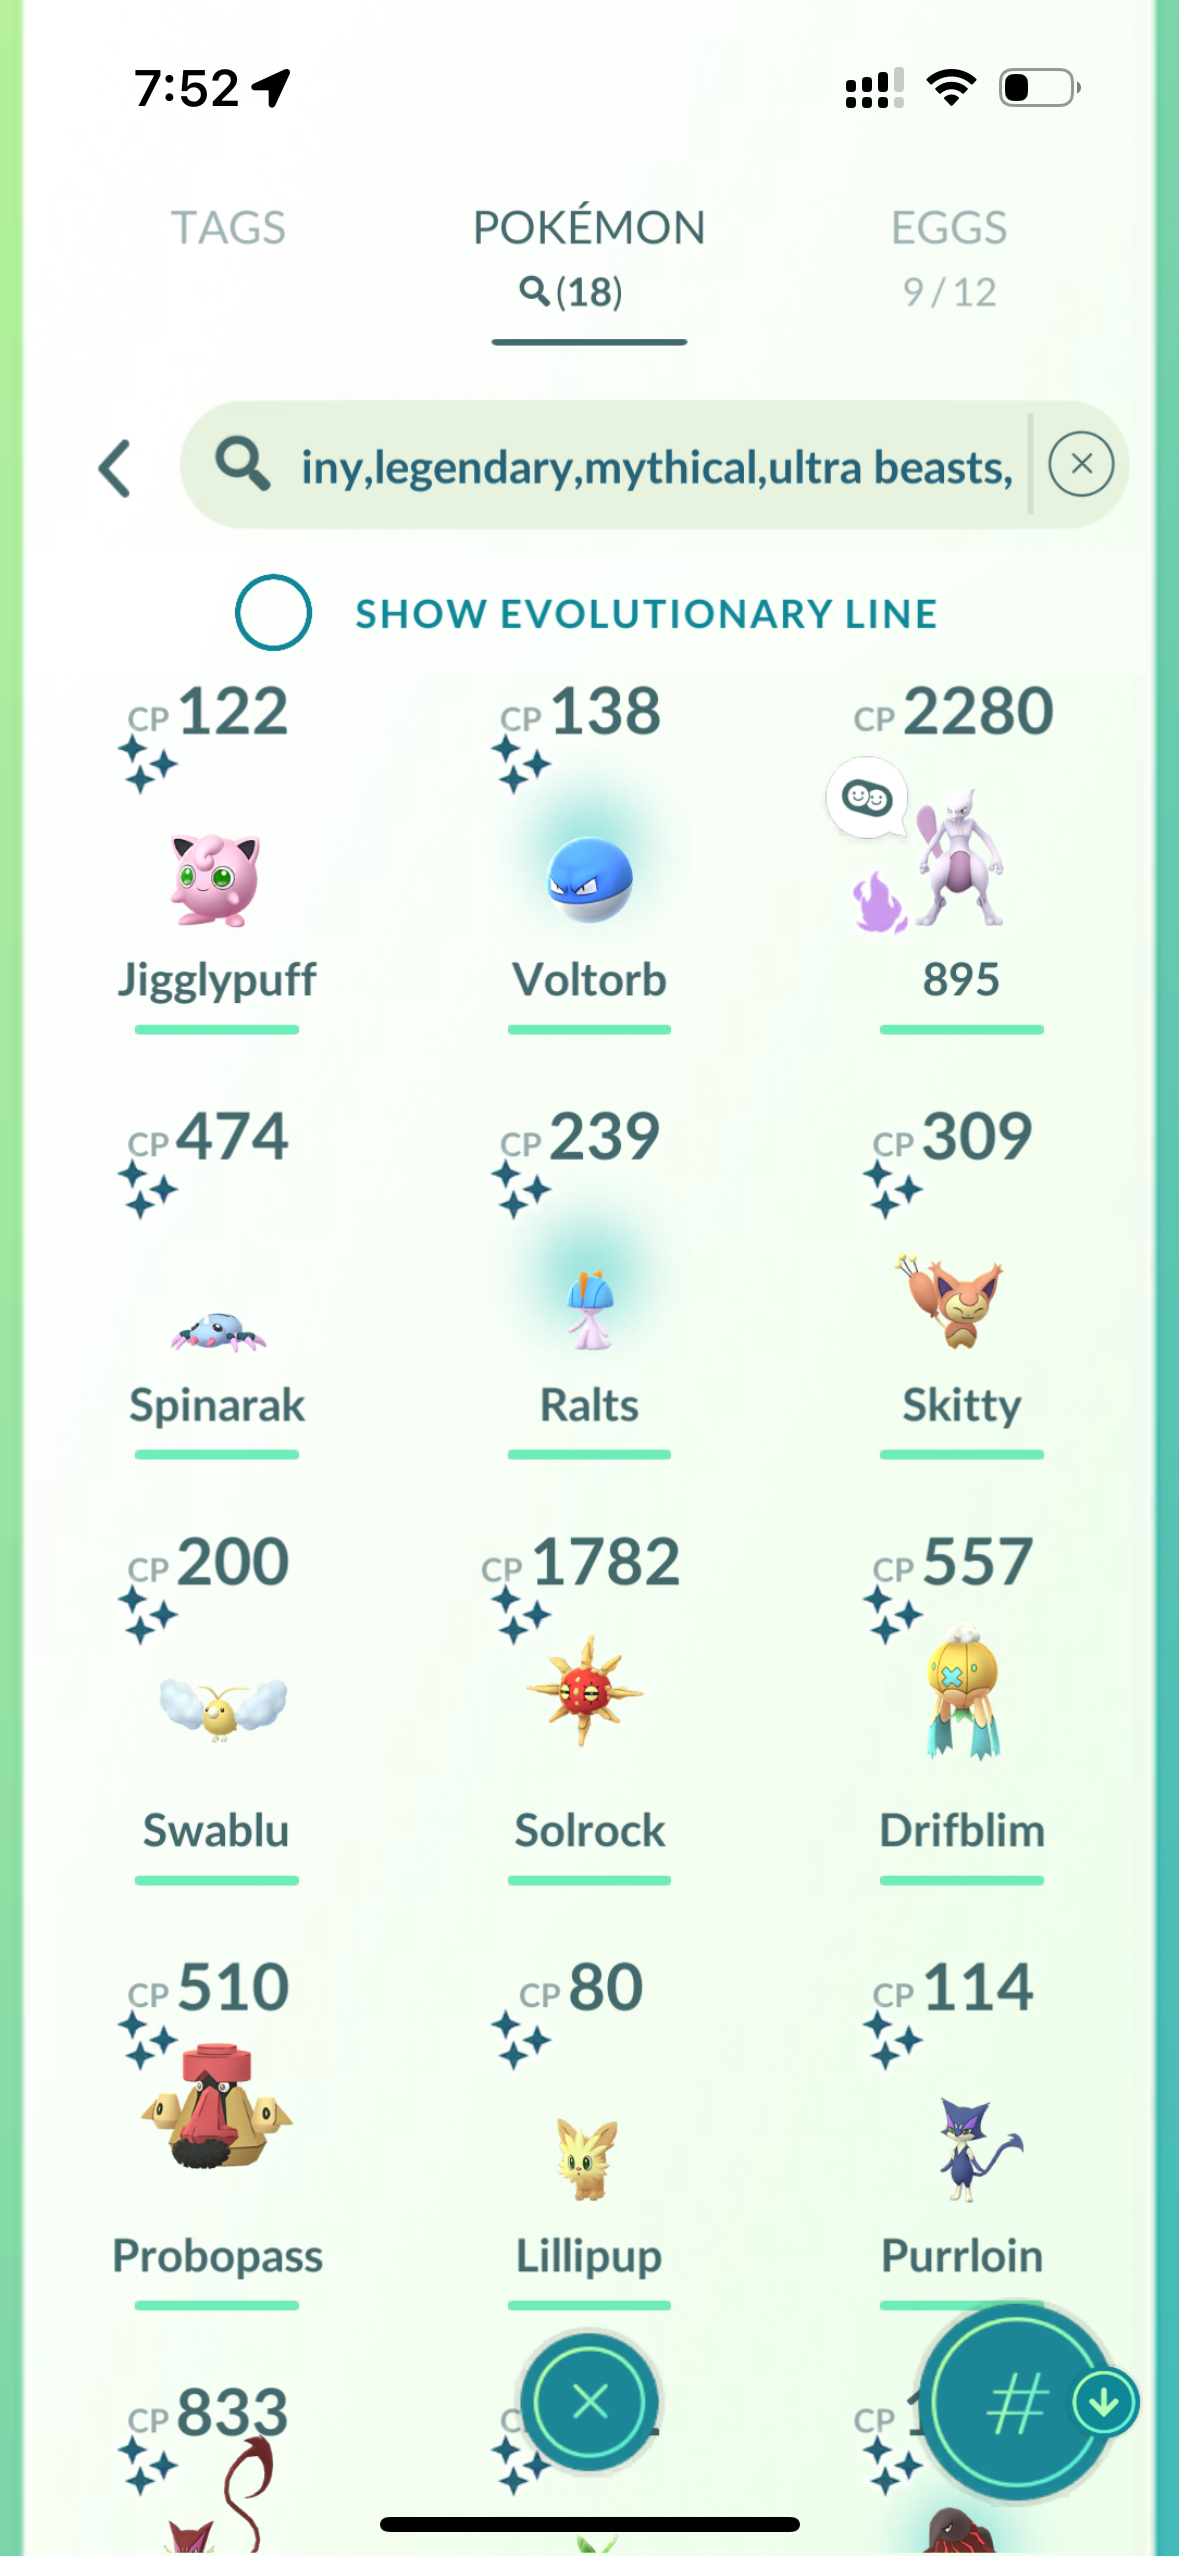 InvisibleSounds account (18 shiny/legendary)